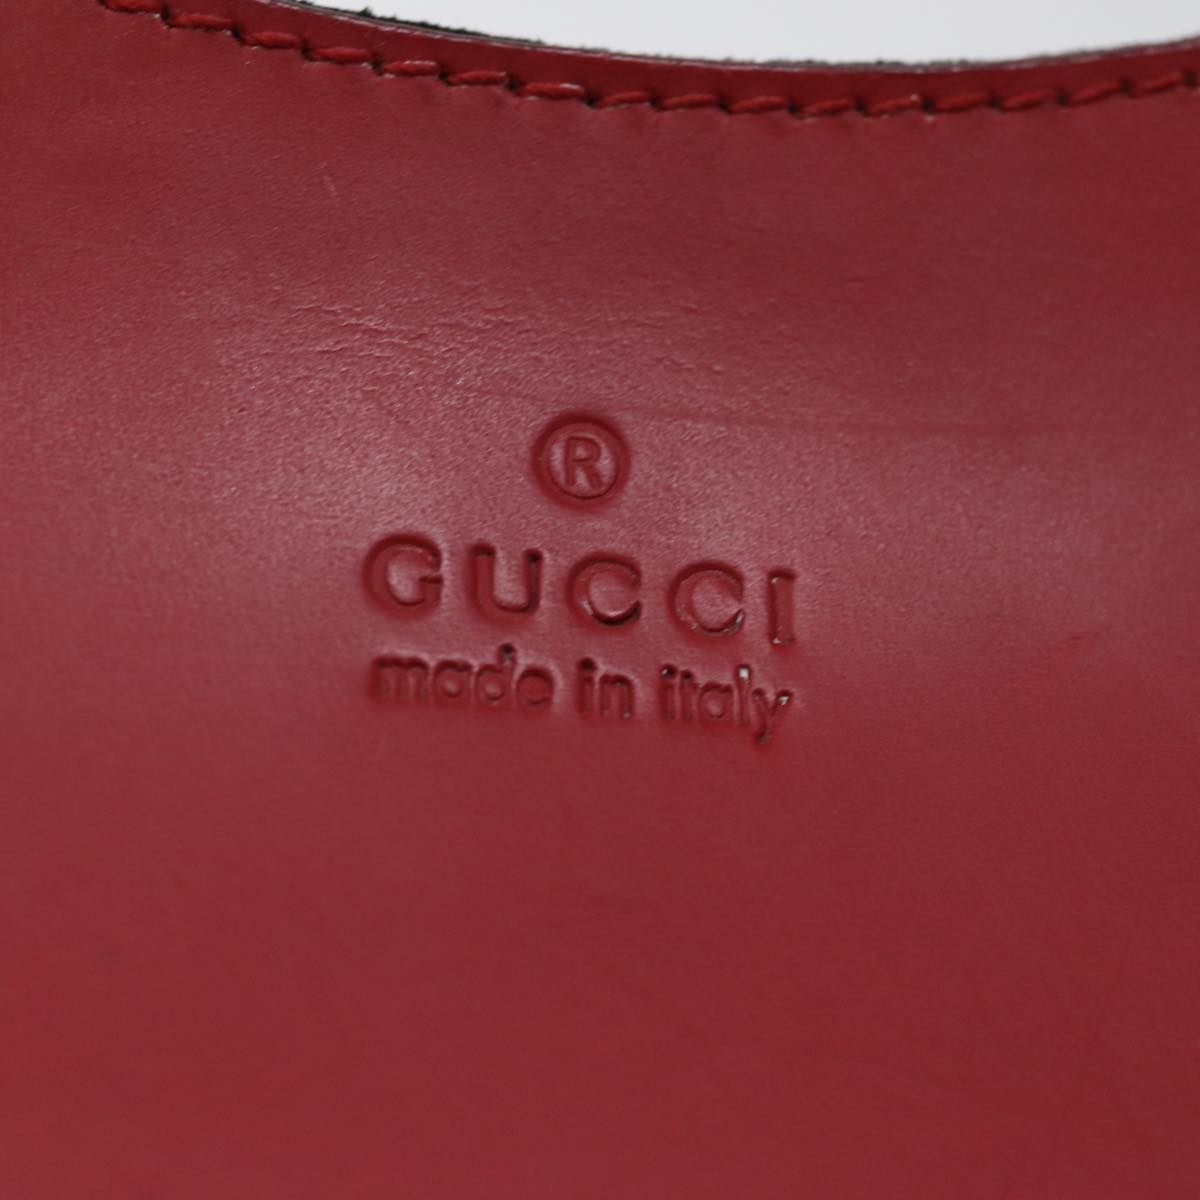 GUCCI Bamboo Hand Bag Leather Red 001 3761 Auth ep4324